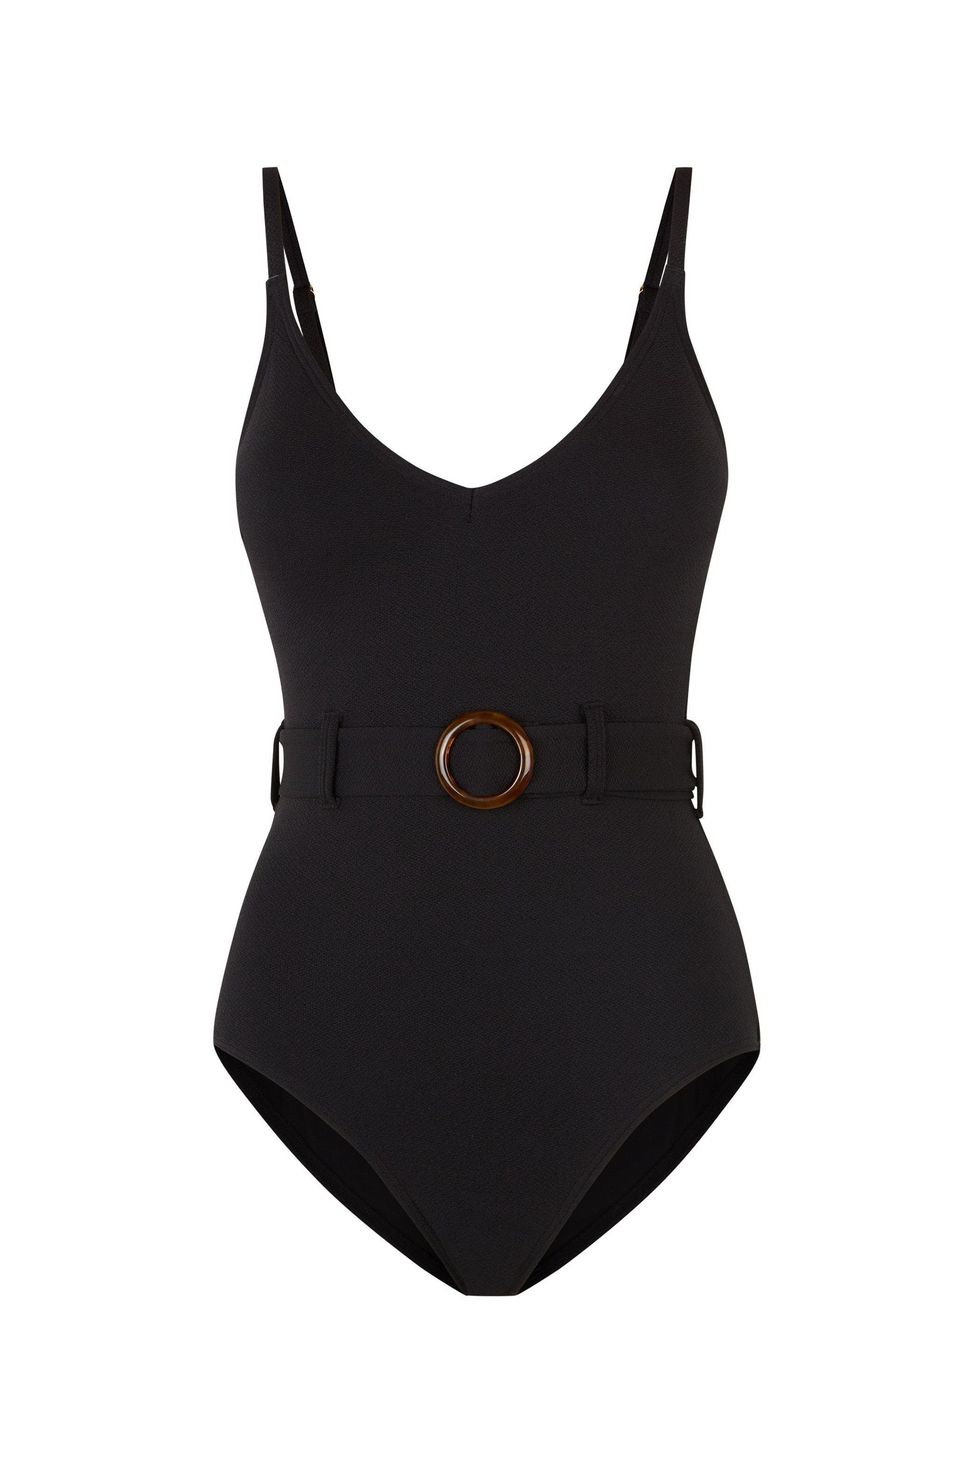 15 Best Belted Swimsuits for 2019 - Cutest One-Pieces & Bikinis With Belts